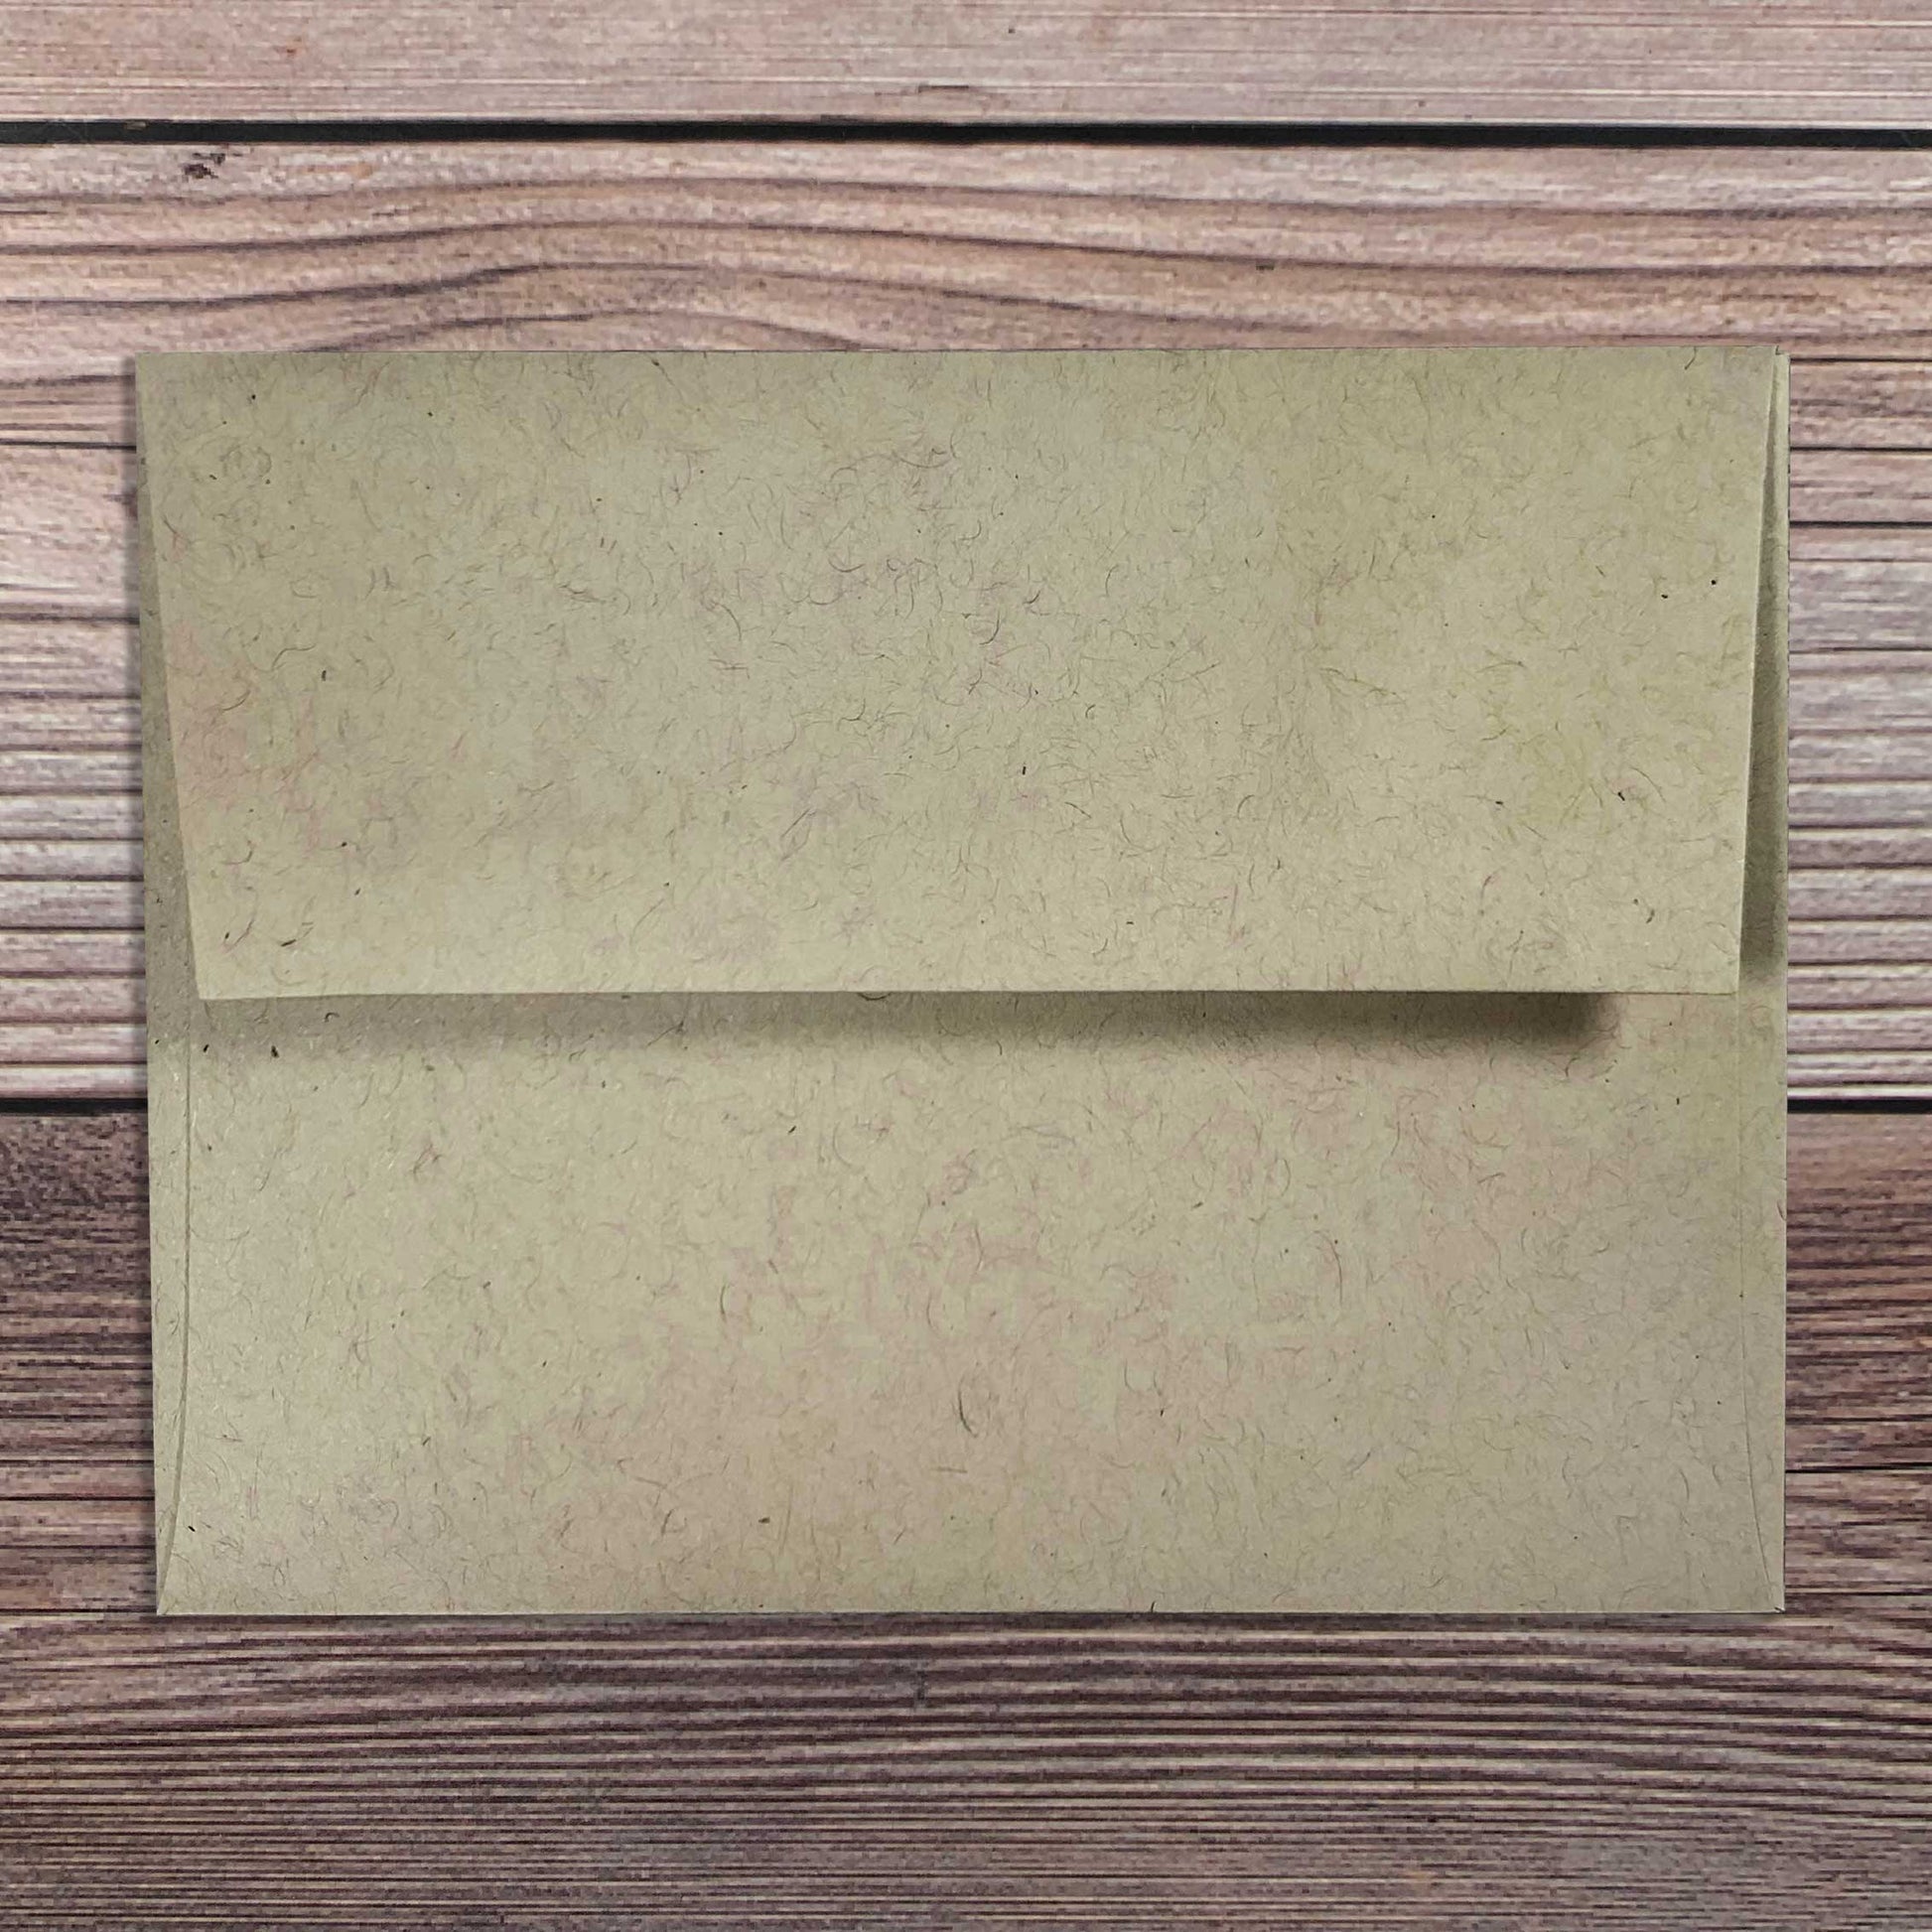 Greeting Card envelope, kraft color, square flap, included with letterpress thank you card.